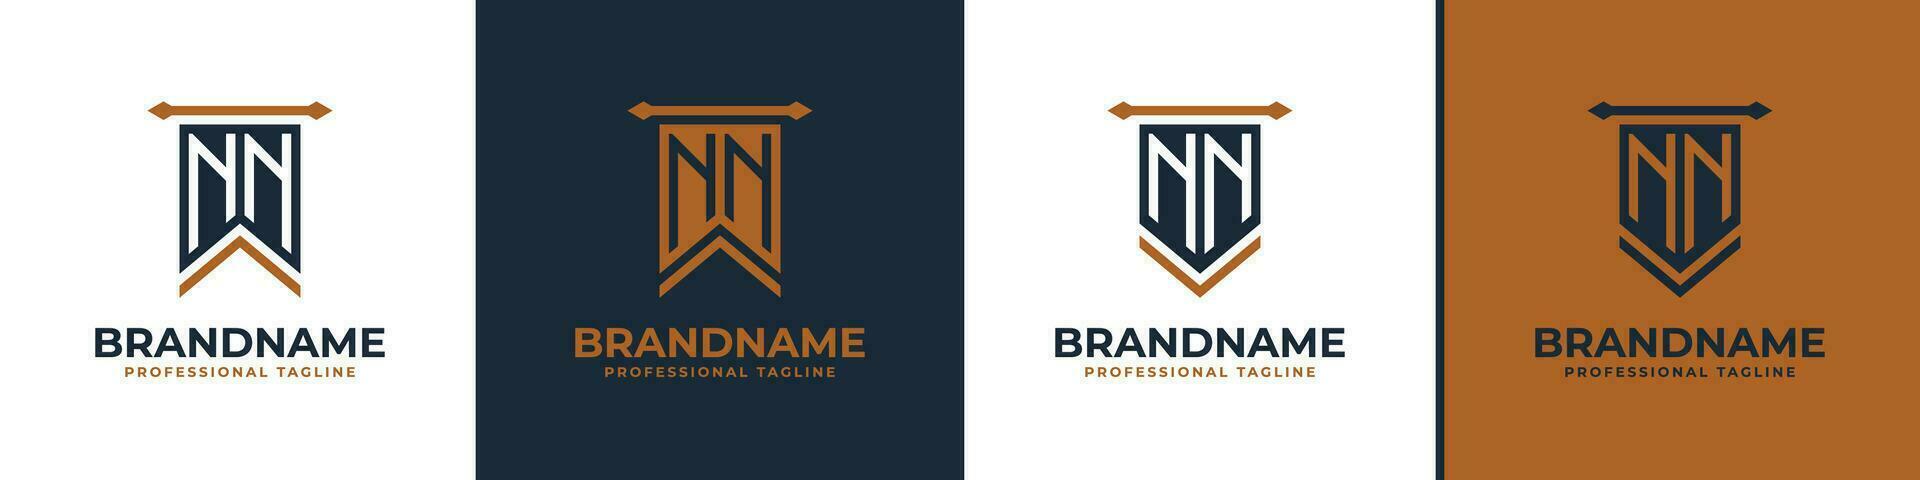 Letter NN Pennant Flag Logo Set, Represent Victory. Suitable for any business with N or NN initials. vector